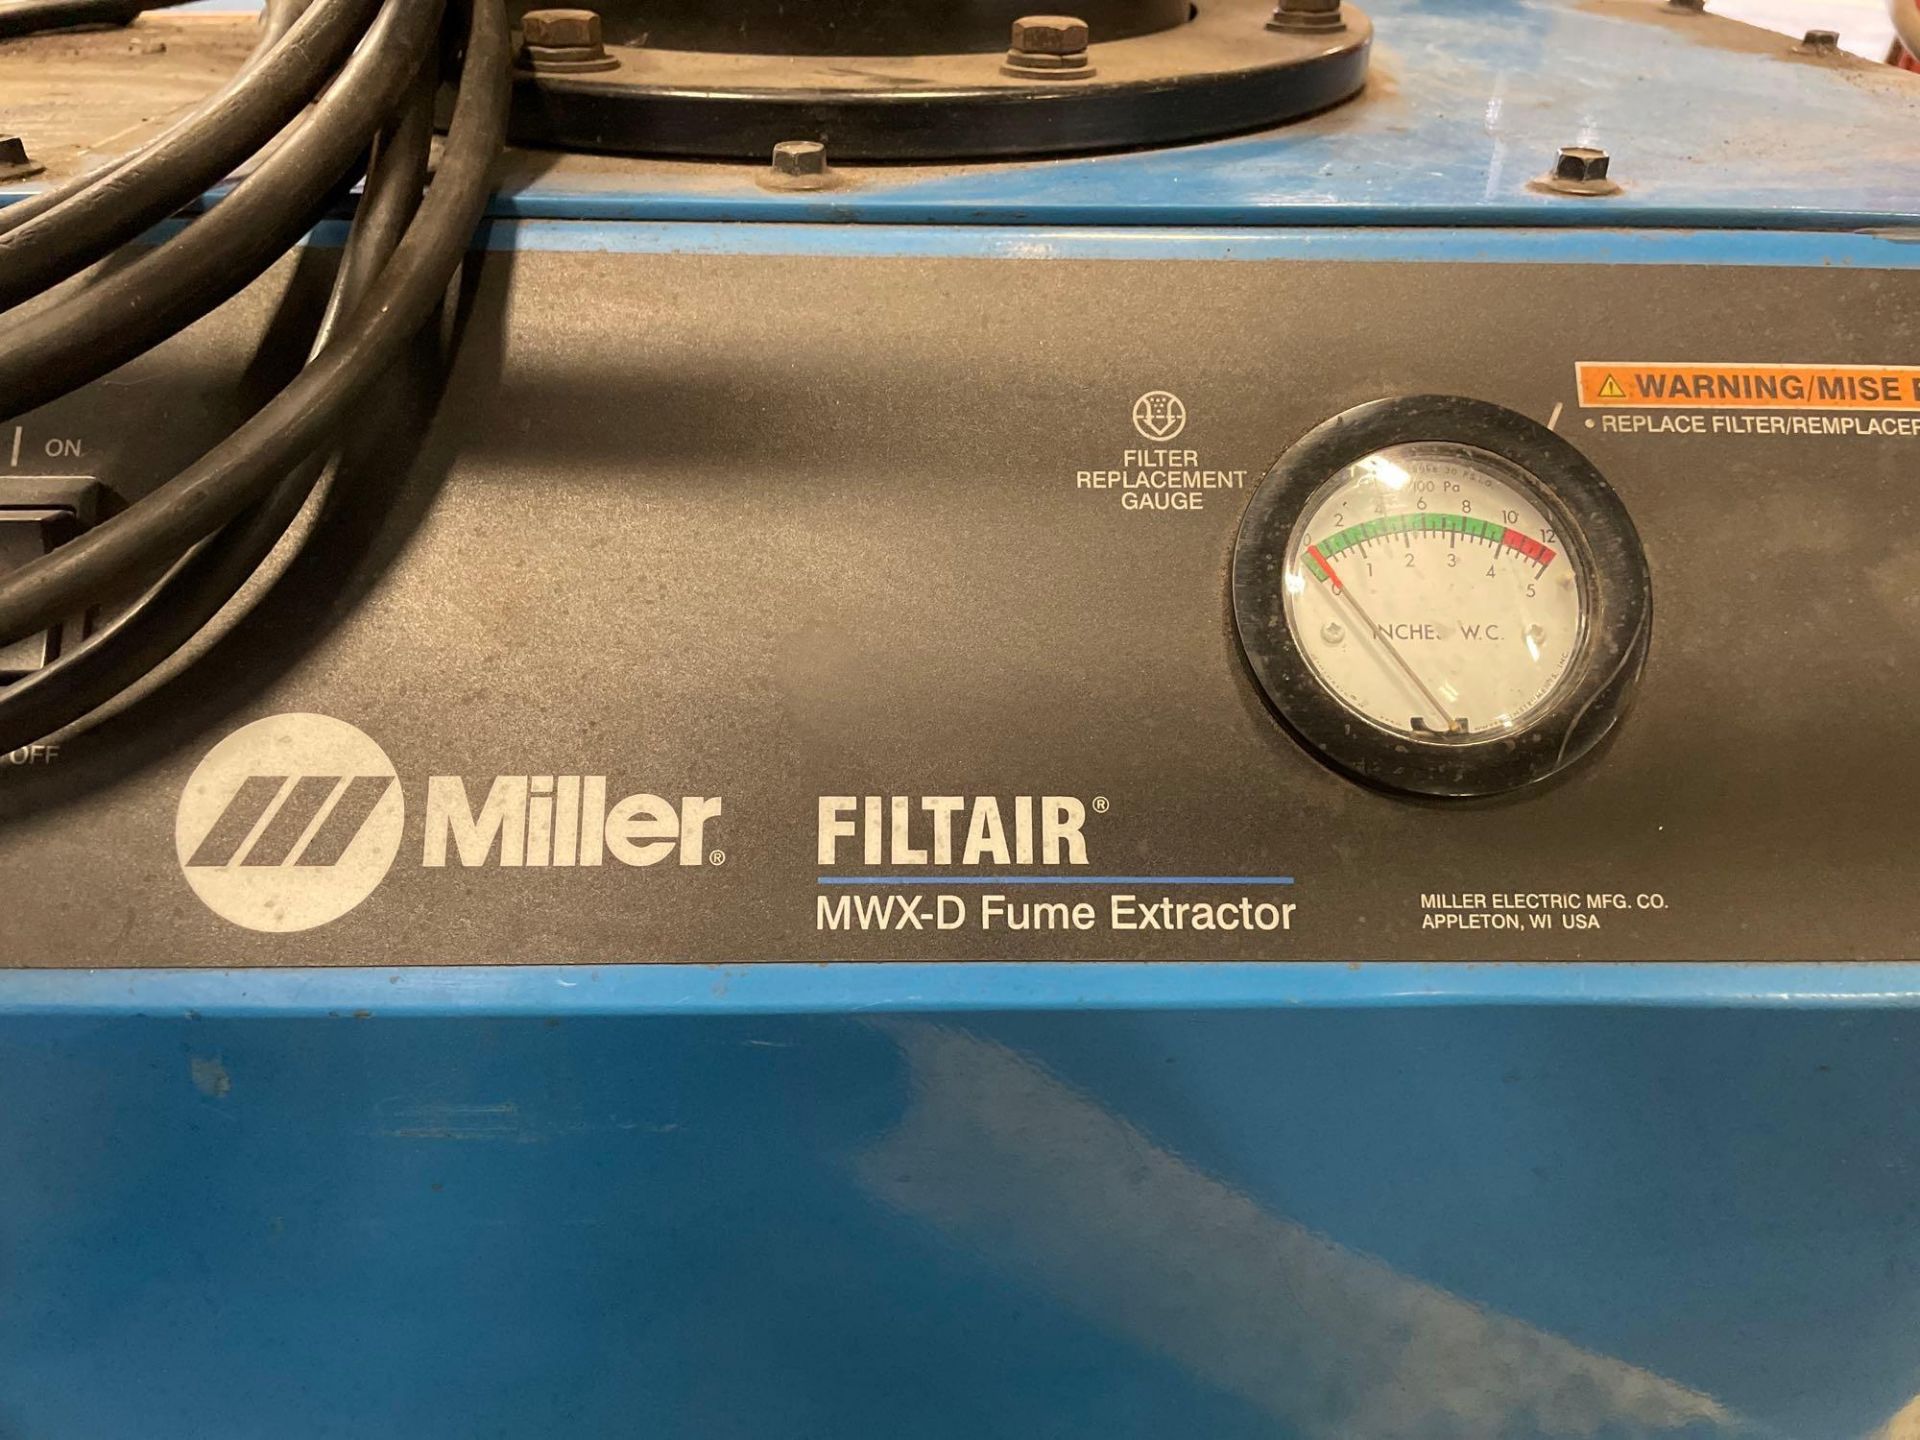 Miller Filtair MWX-D Fume Extractor on Casters - Image 3 of 10